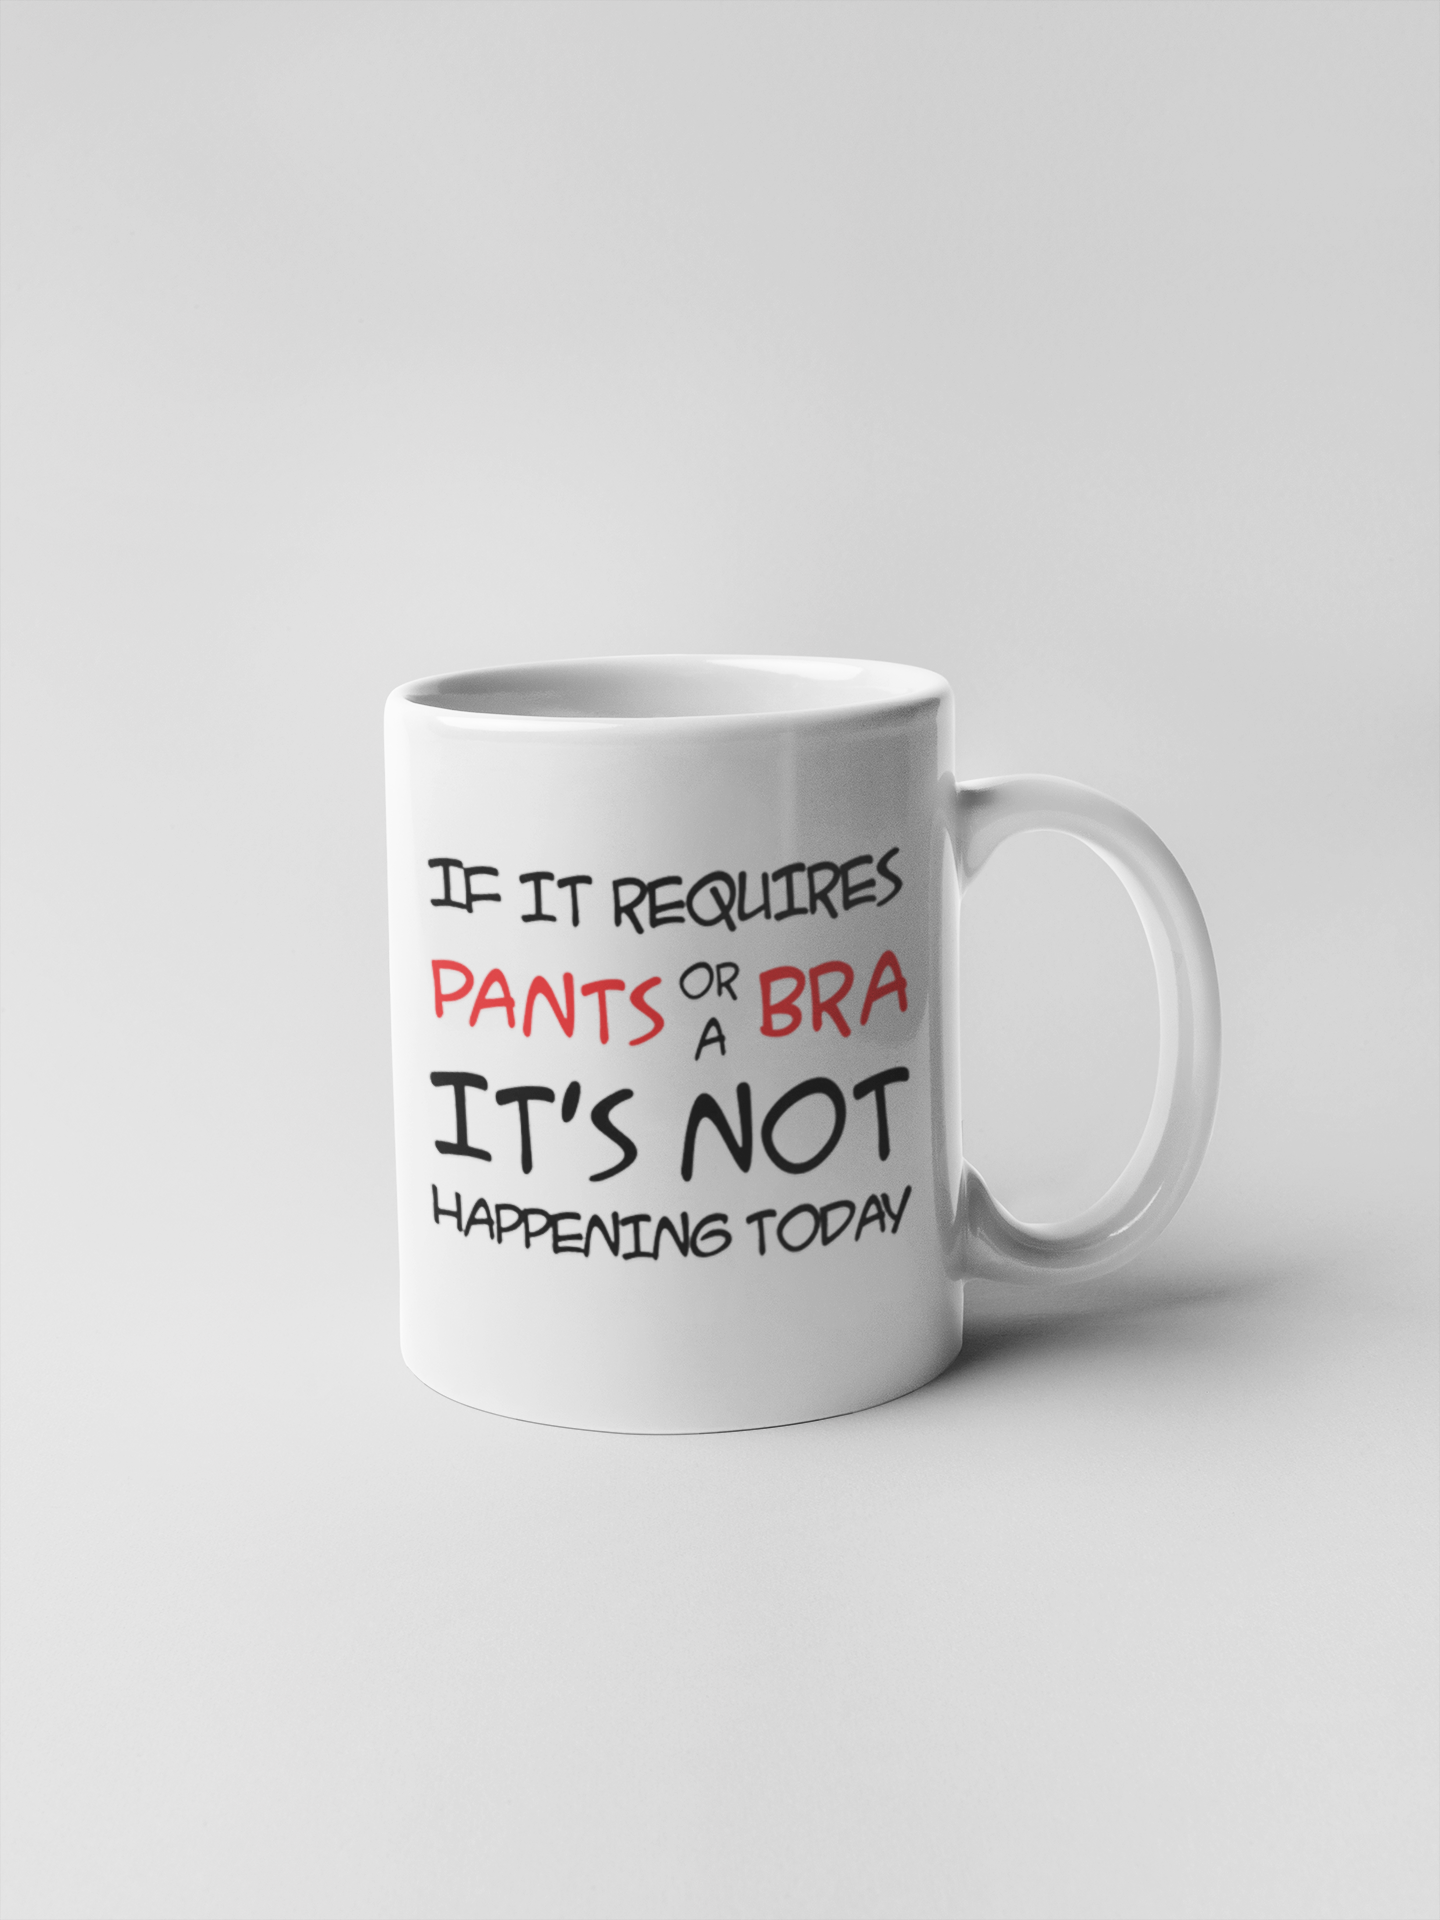 If It Requires Pants or a Bra Its Not Happening Today Ceramic Coffee Mugs